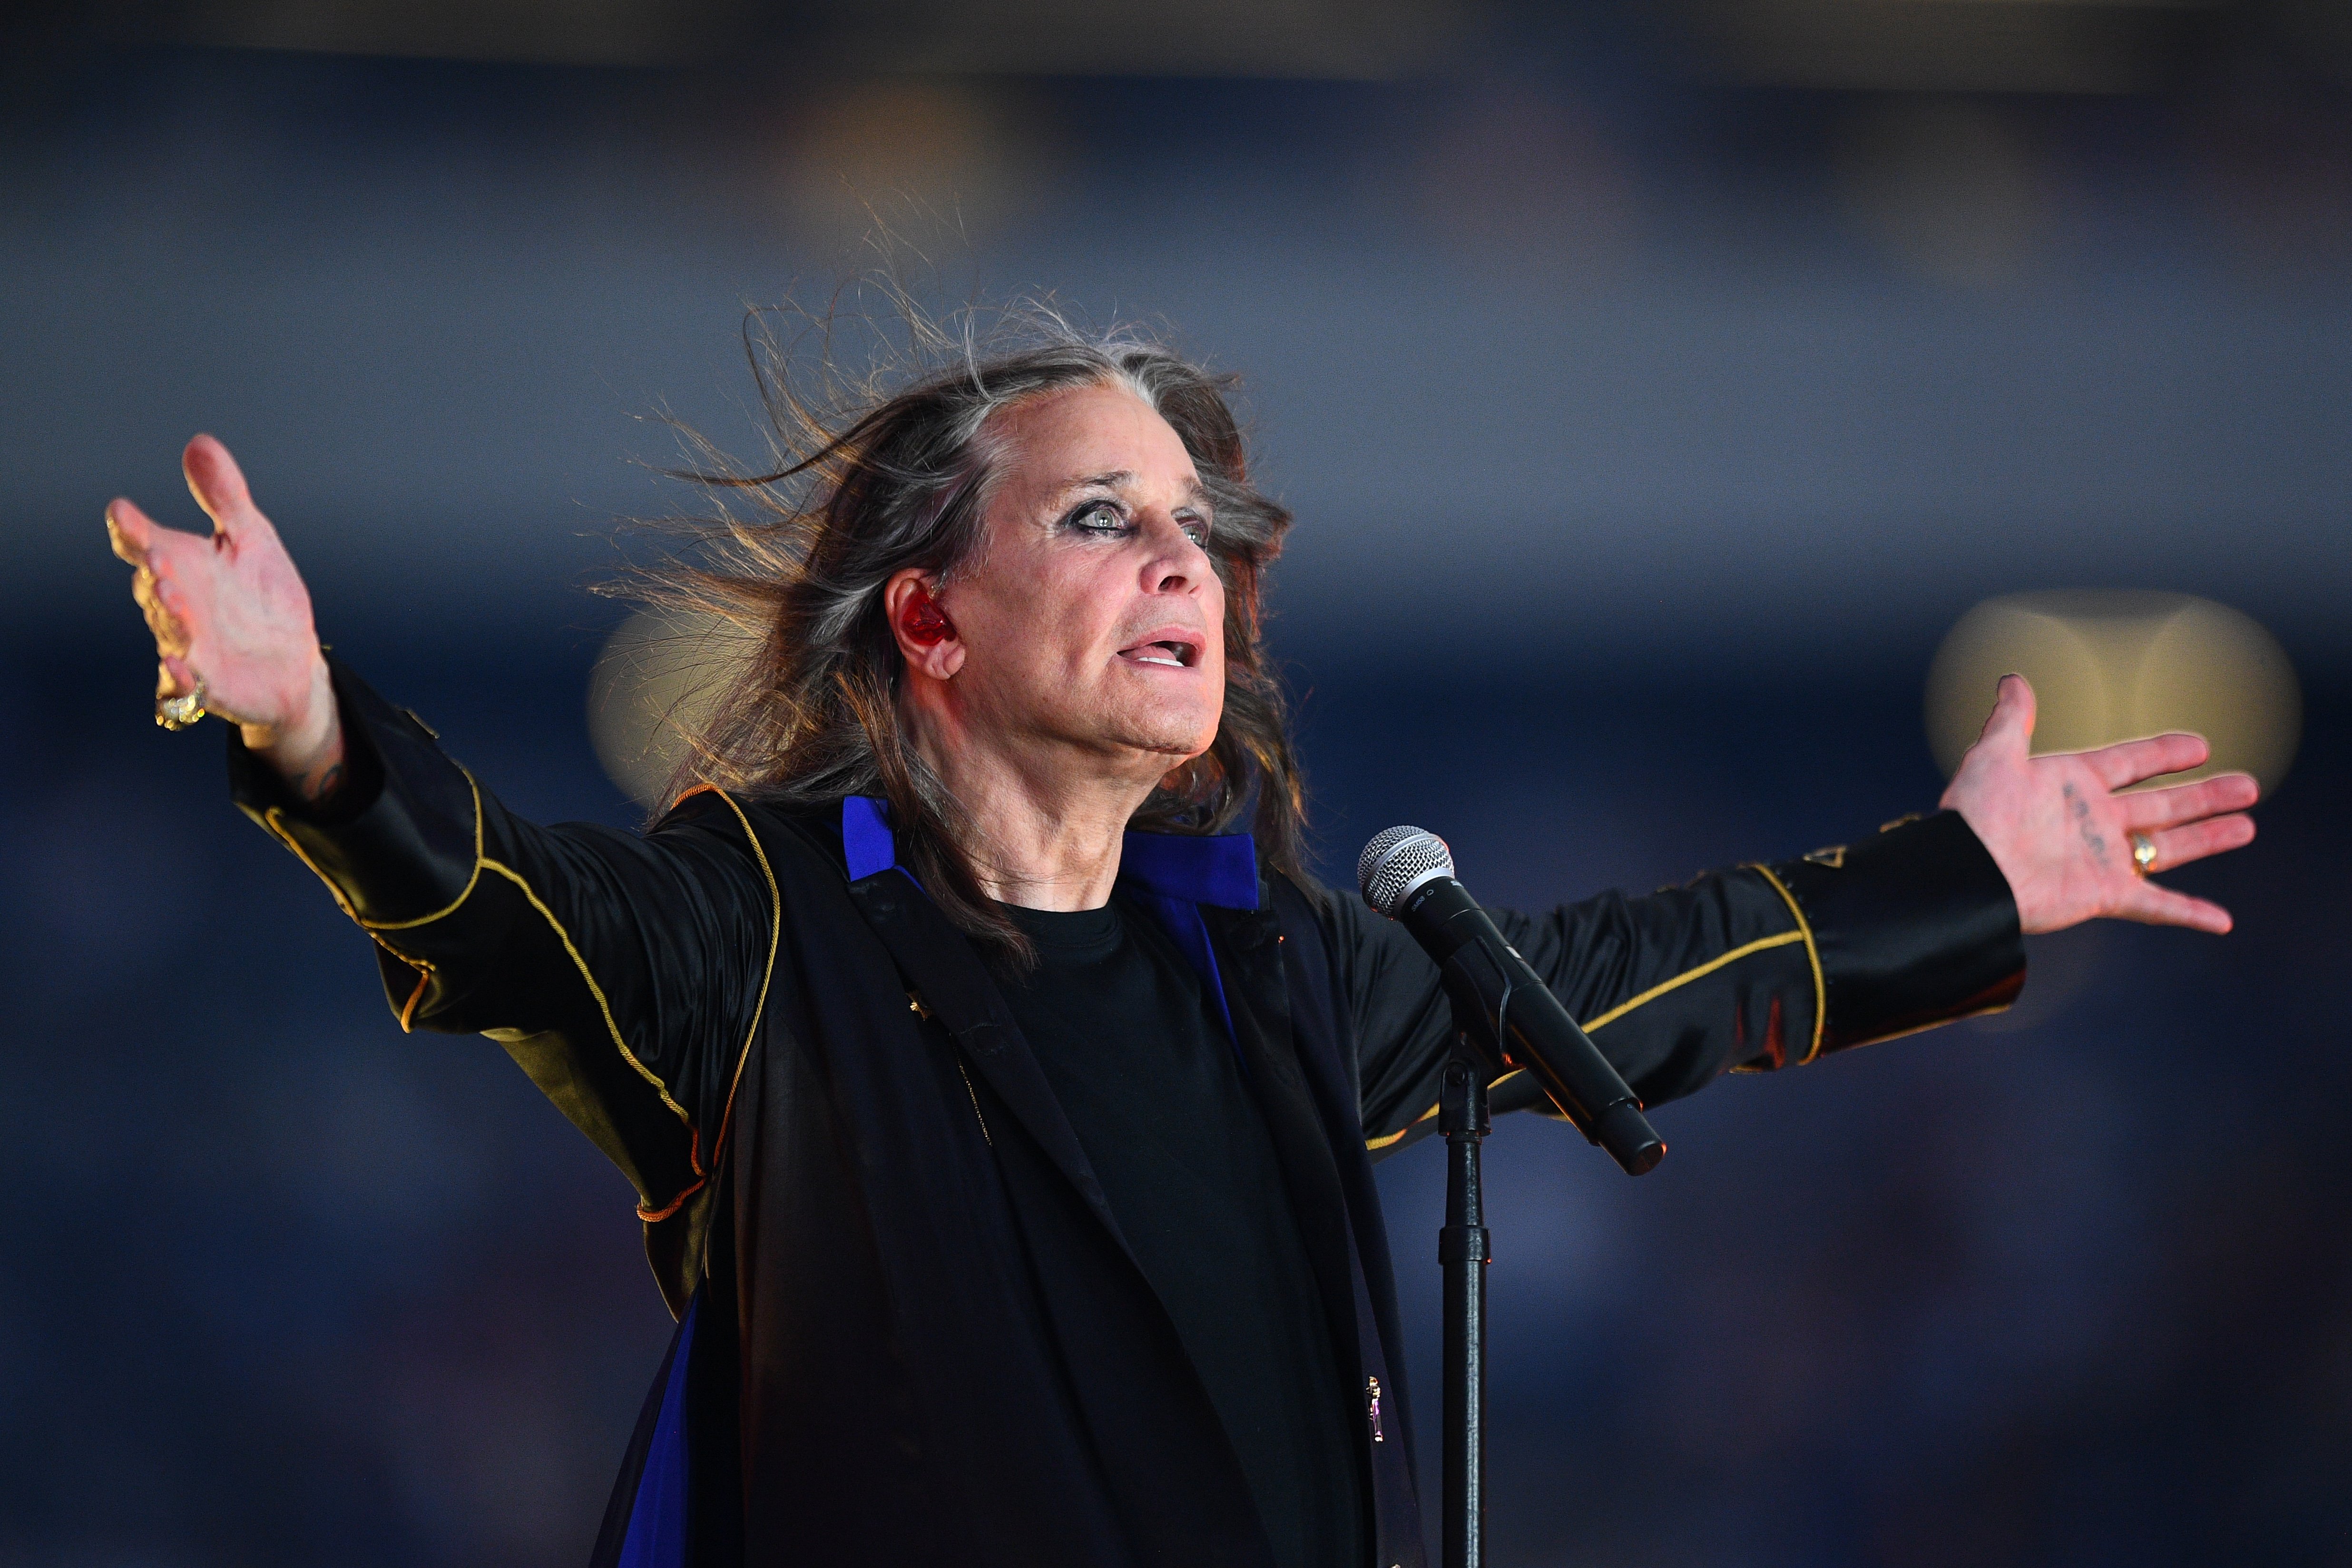 Ozzy Osbourne performs at halftime during an NFL game on September 8, 2022, in Inglewood, California | Source: Getty Images